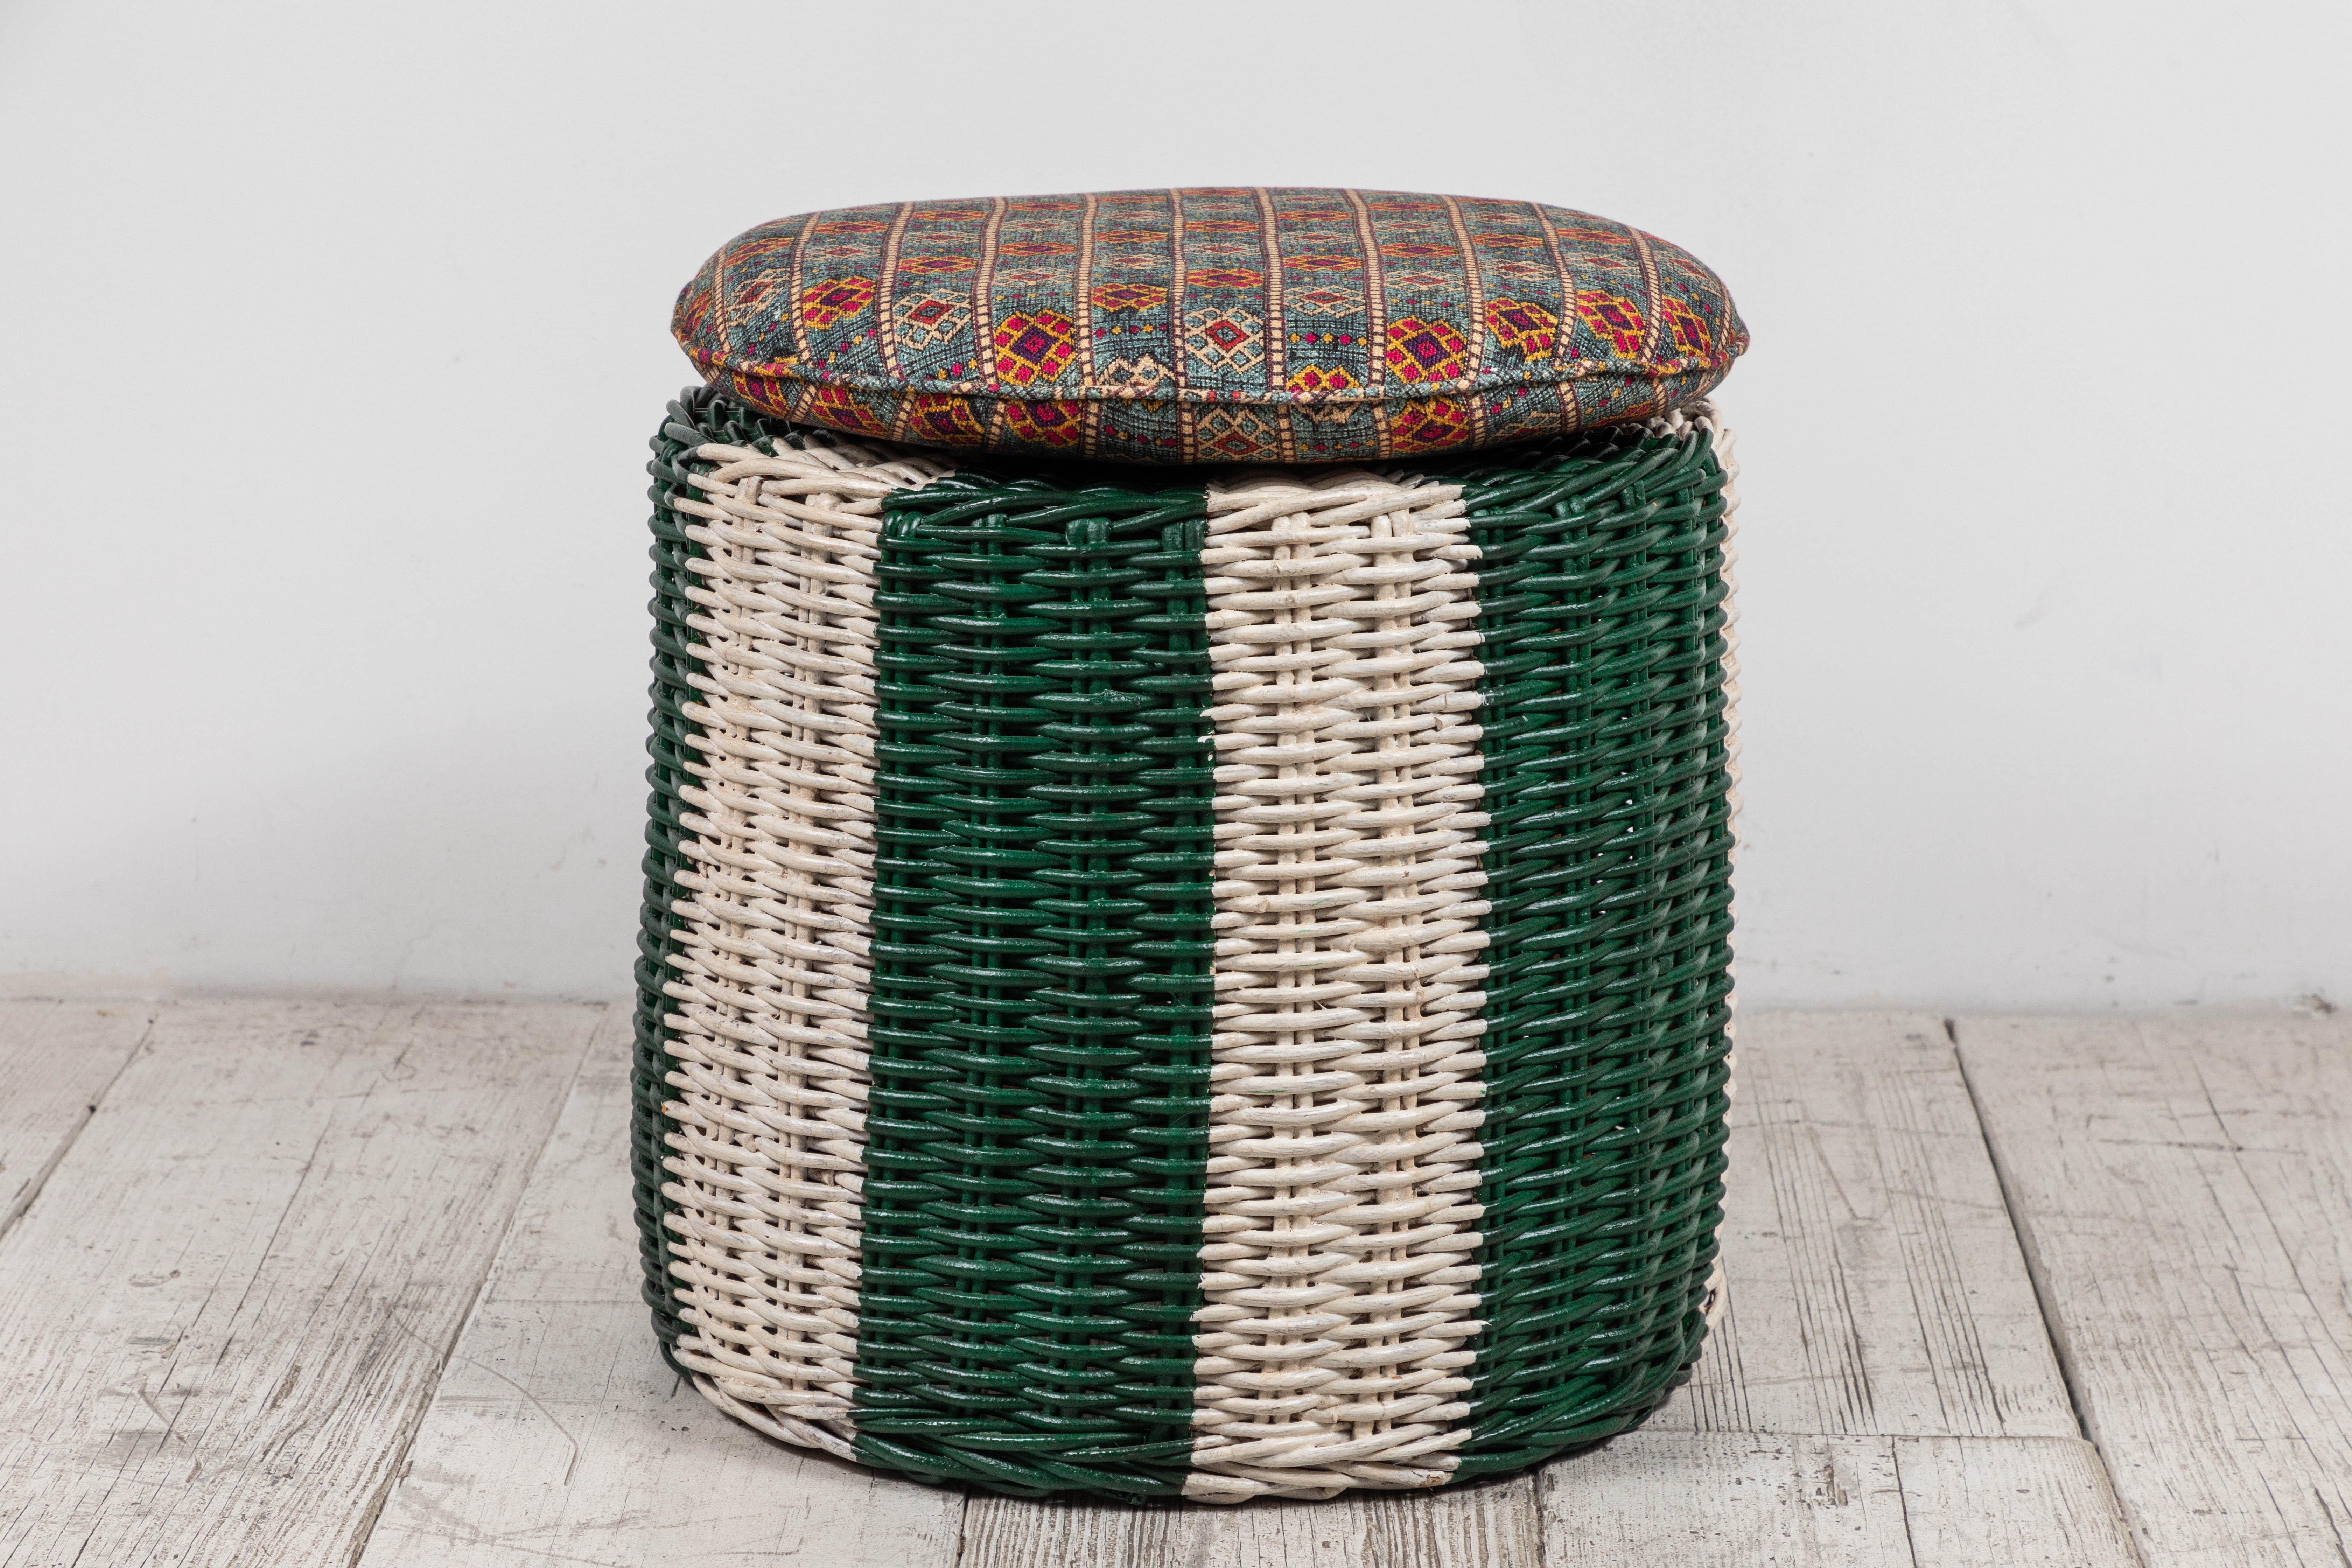 Late 20th Century Green and White Painted Wicker Ottoman with Colorful Pillow Topped Cushion